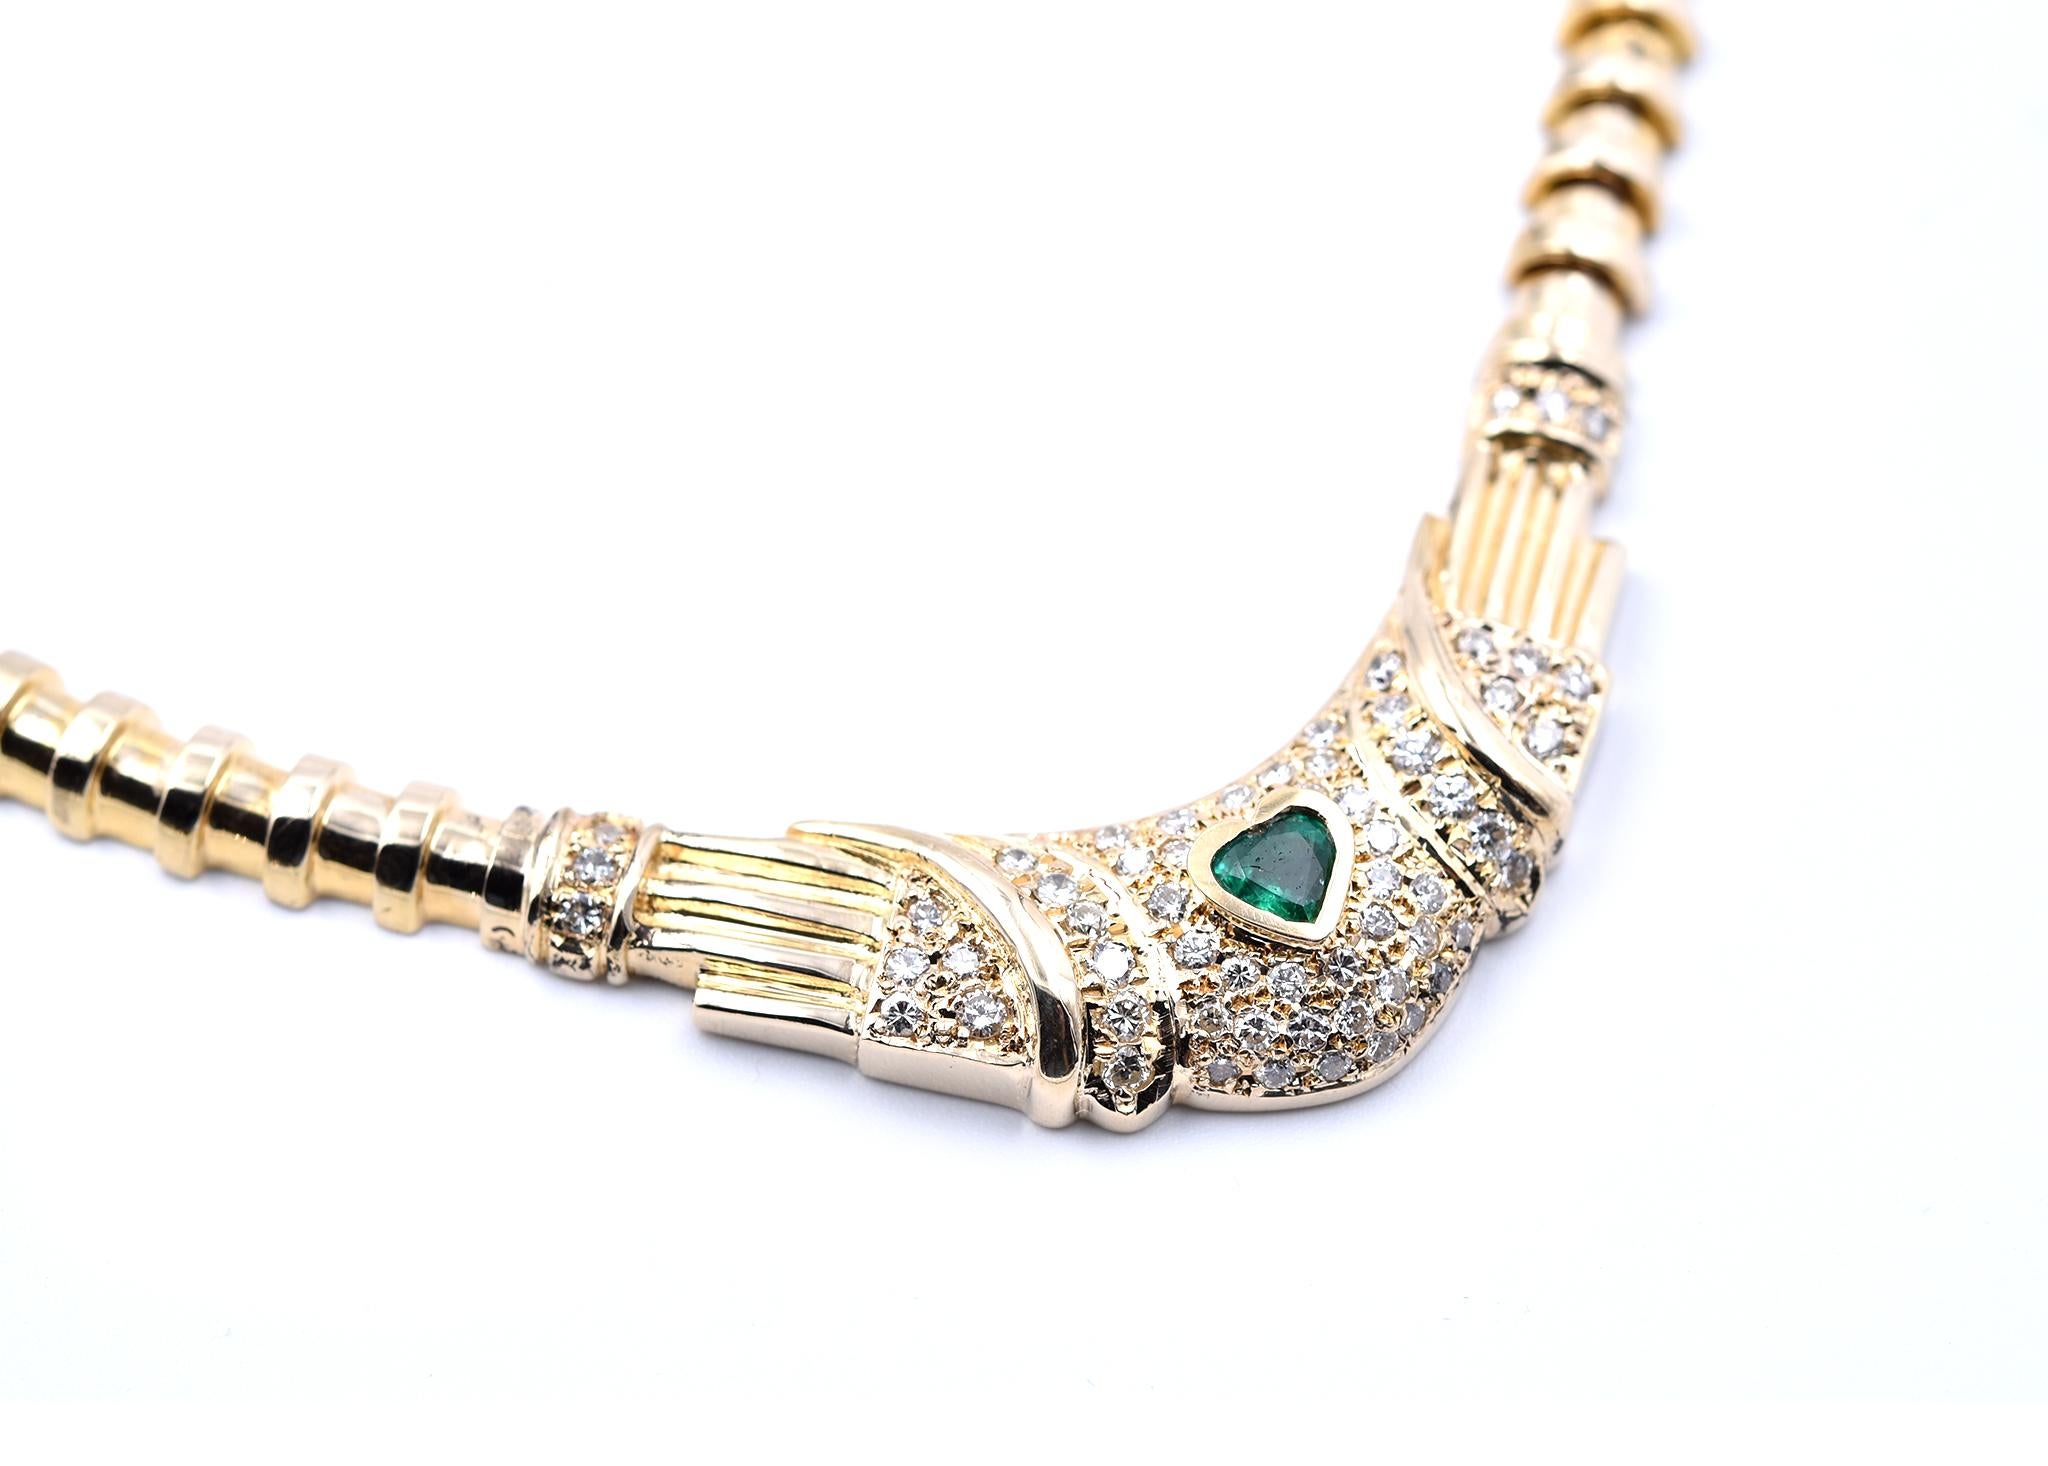 Designer: Herringbone
Material: 14k yellow gold
Diamonds: 60 round brilliant cuts = 1.50cttw
Color: H
Clarity: SI1	
Emerald: 1 heart cut emerald center stone=.33ct
Dimensions: necklace is 17-inches in length and 14.25mm in width
Weight: 65.07 grams
